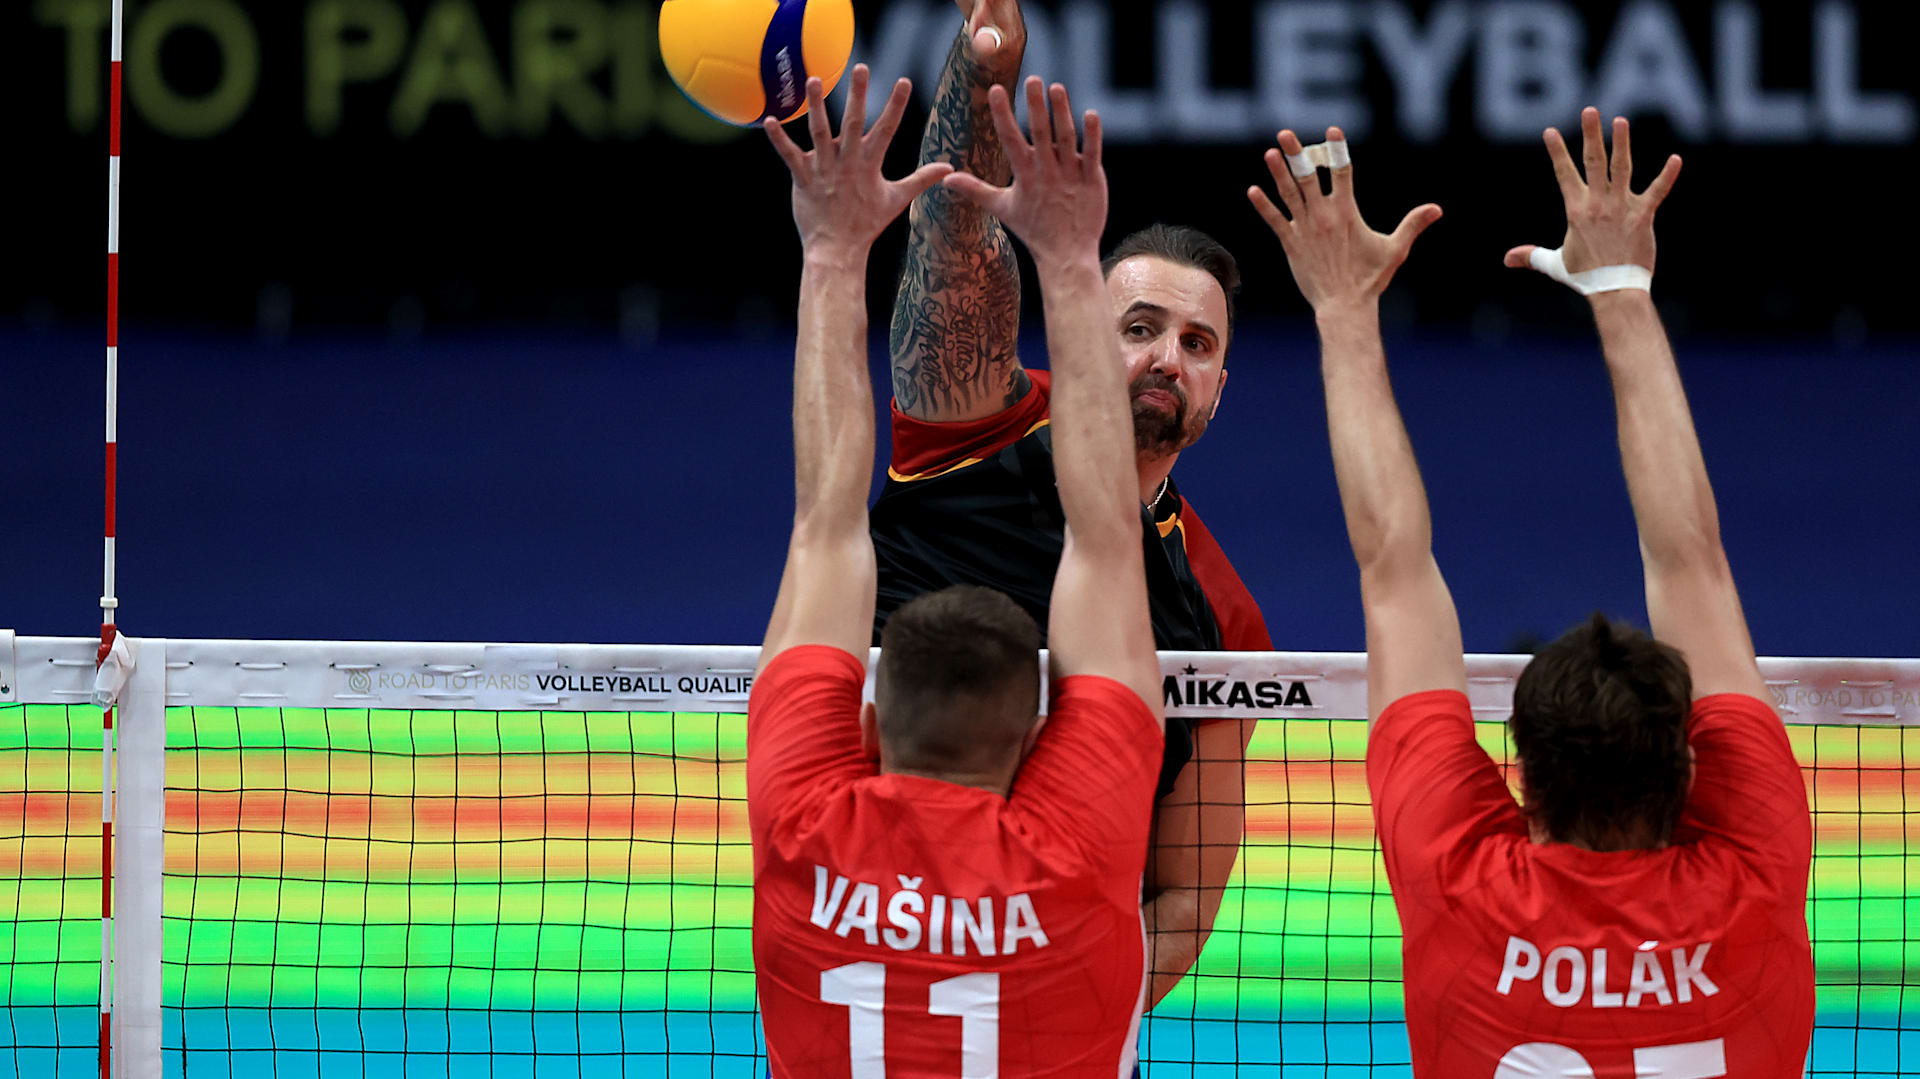 challenge cup volleyball live